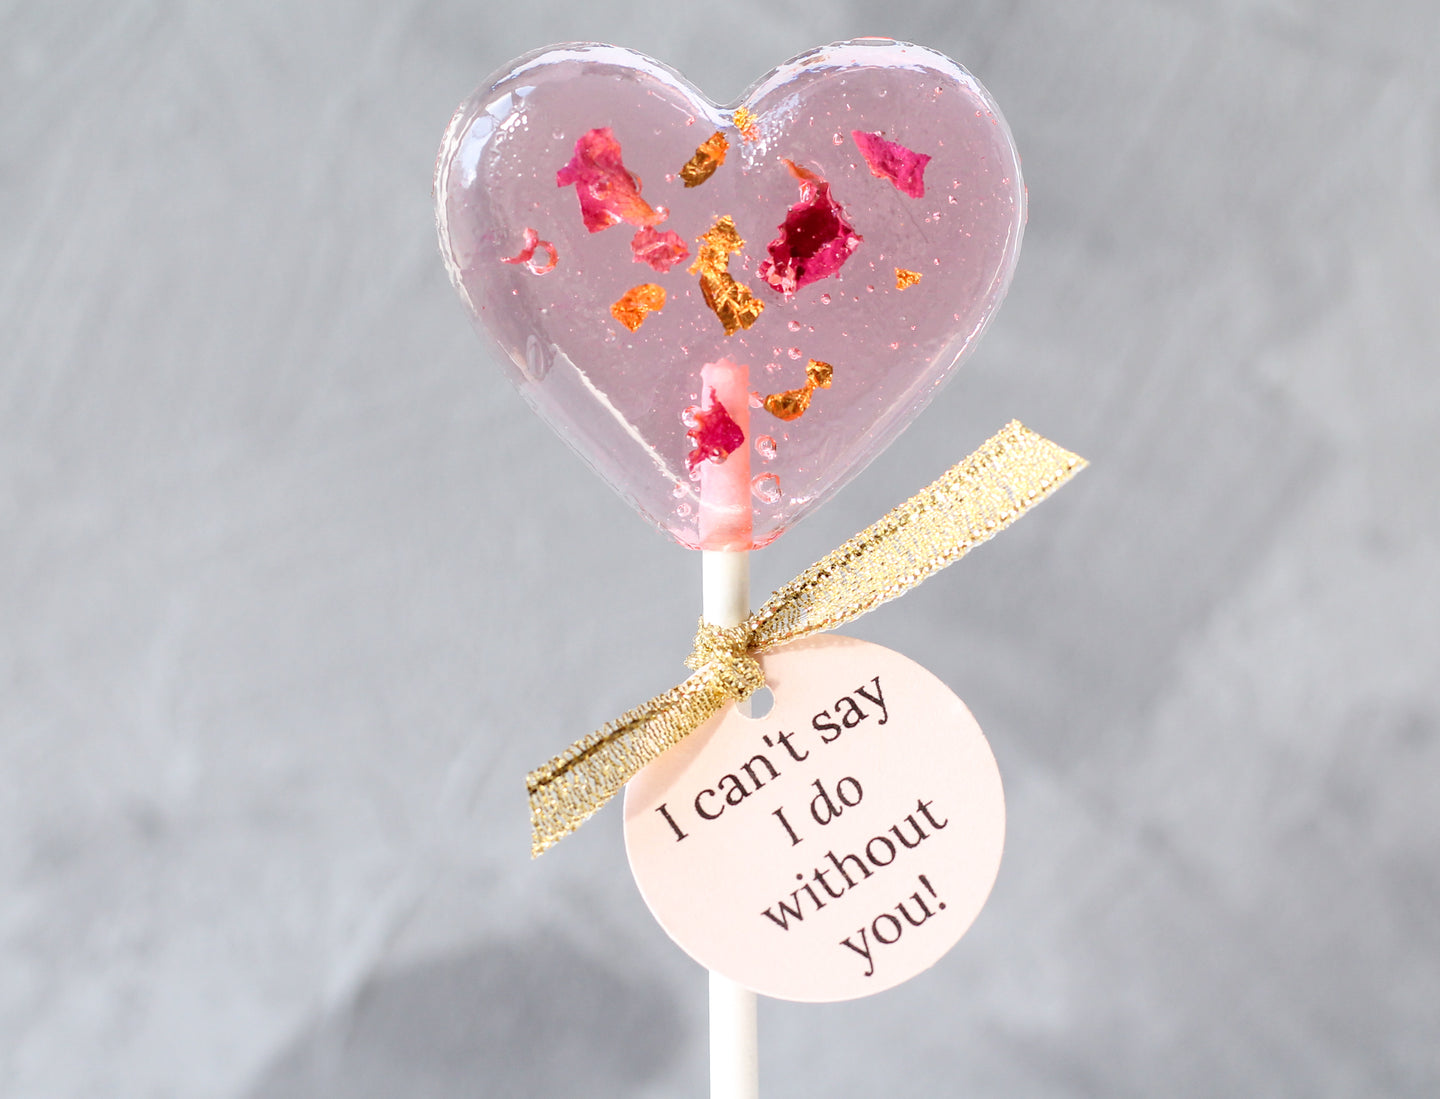 heart shaped lollipop with rose petals and 24 K gold leaf